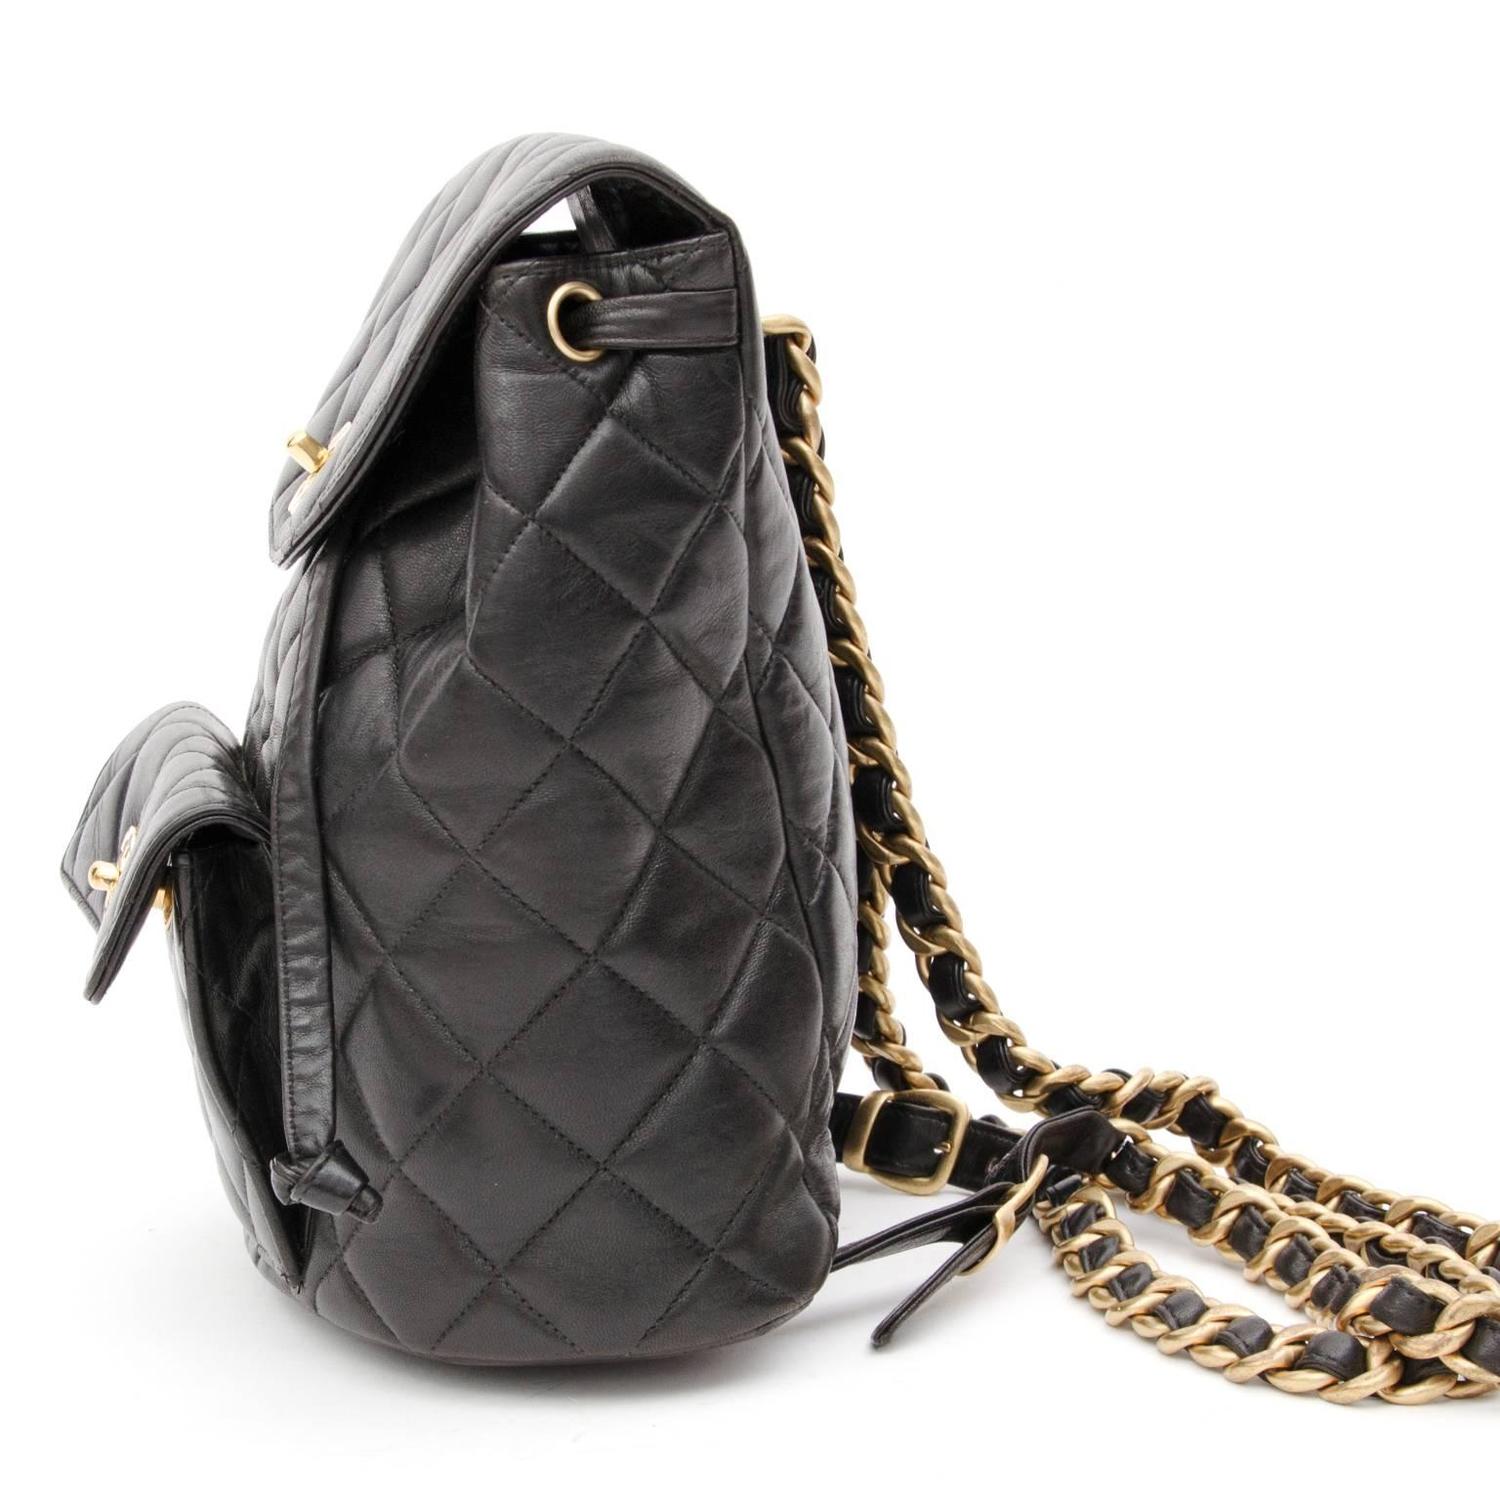 Chanel Black Quilted Leather Backpack at 1stdibs